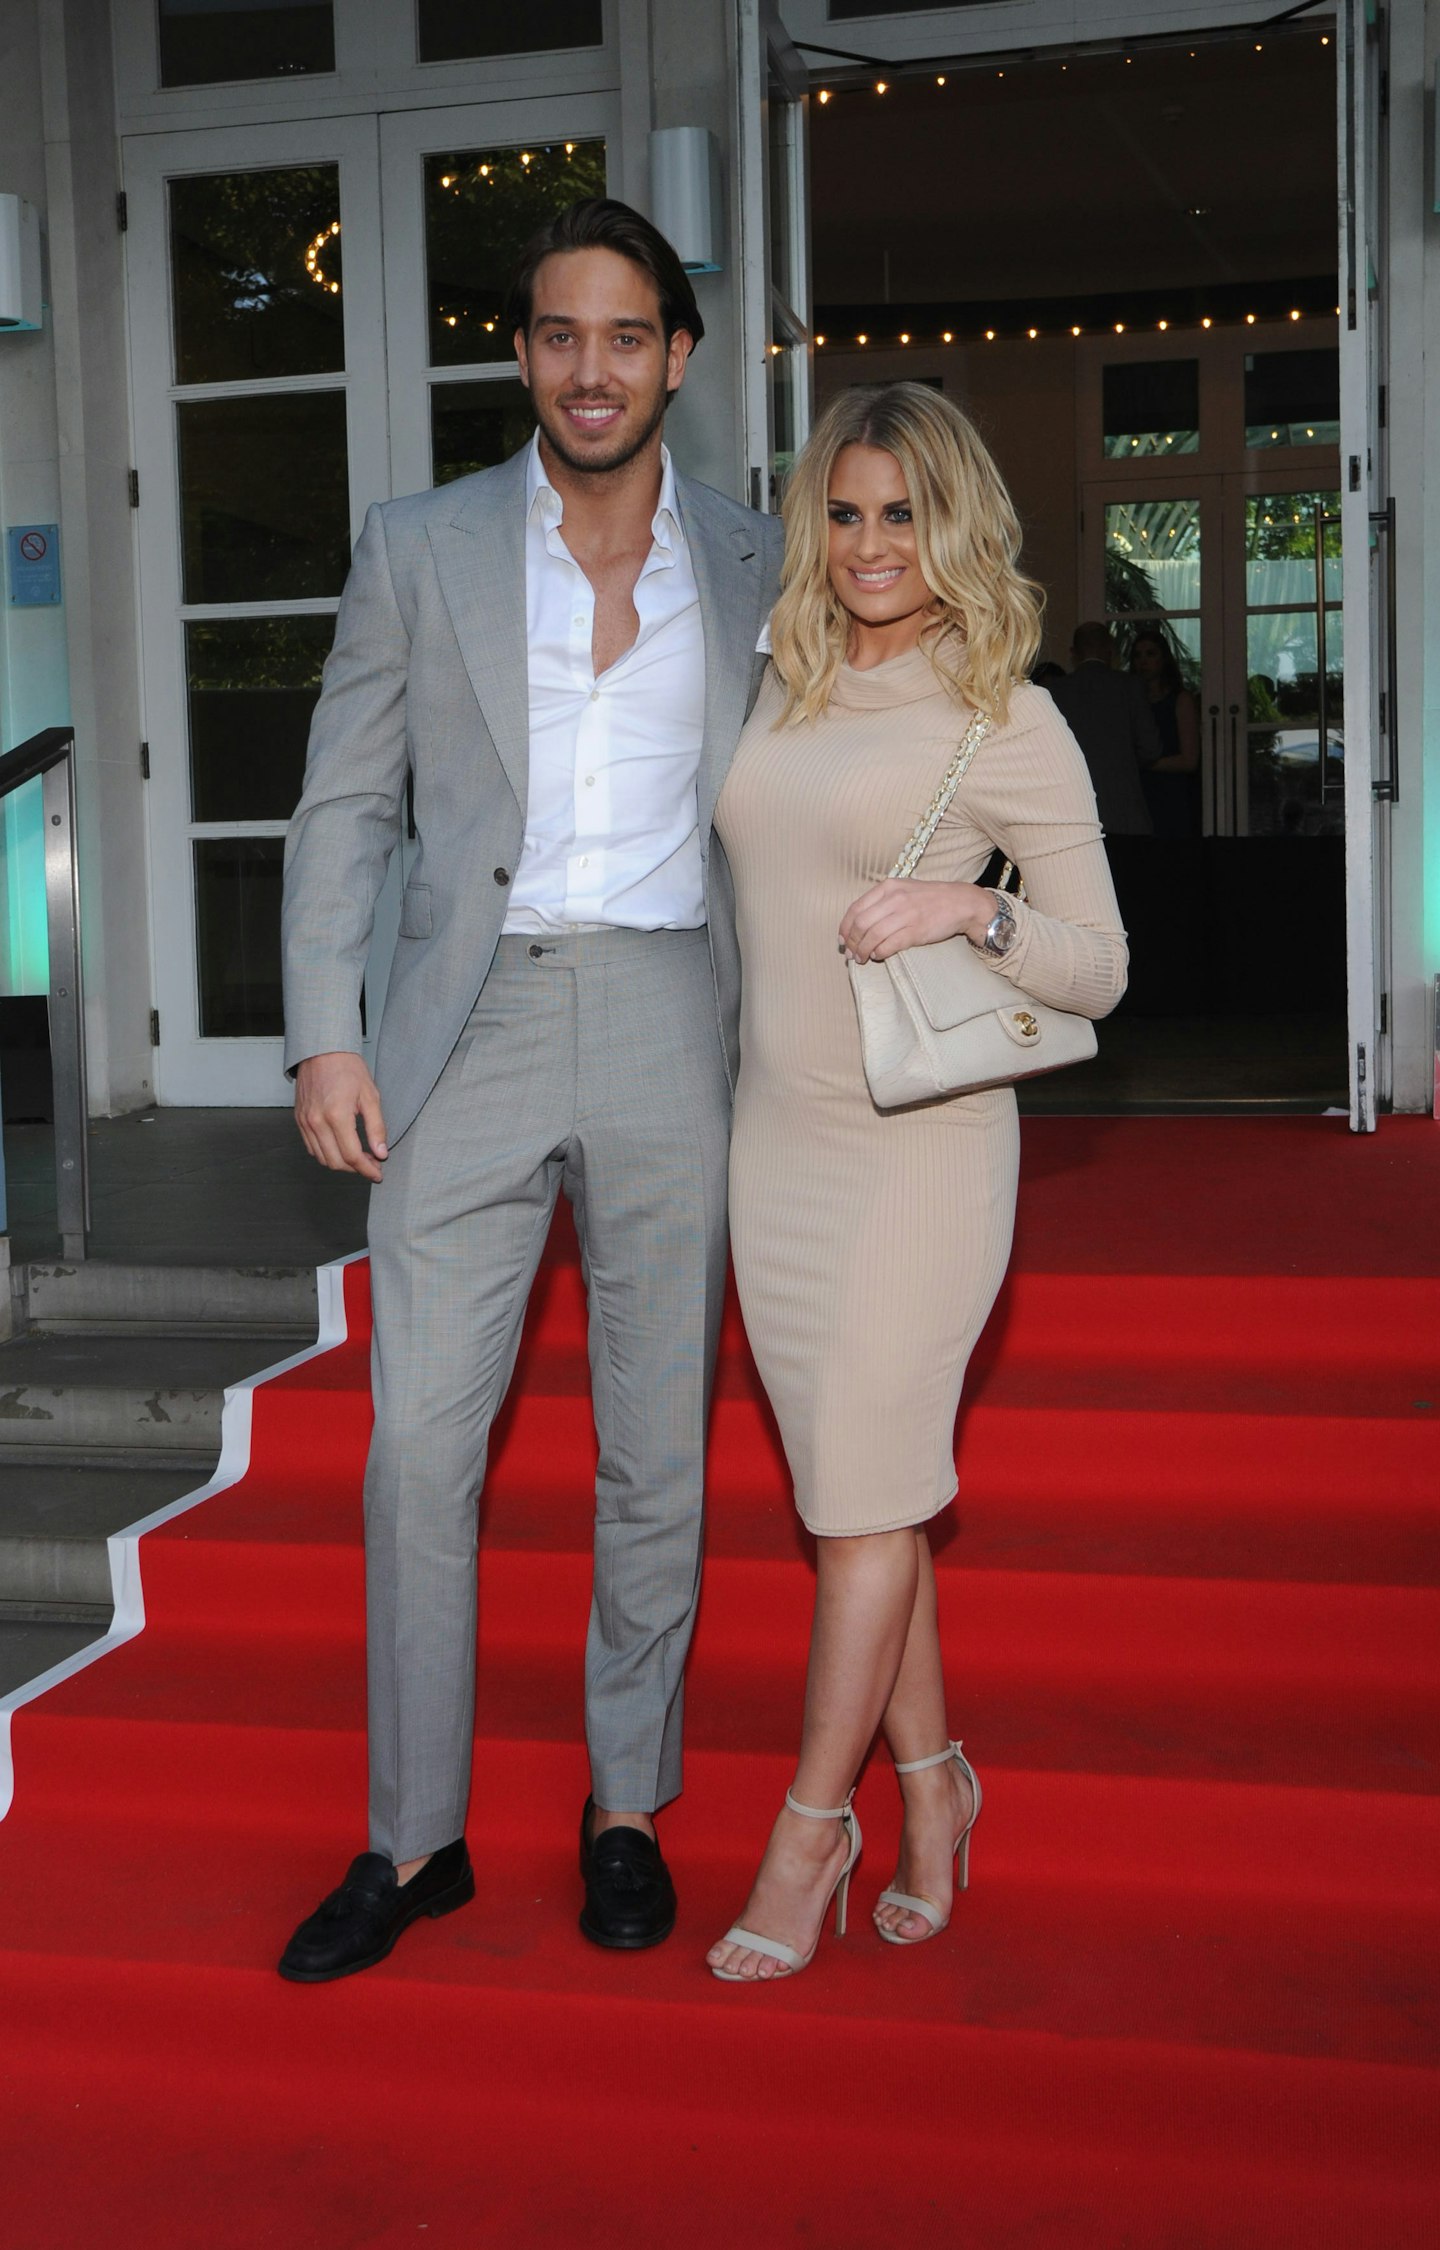 Danielle and Lockie have called time on their relationship